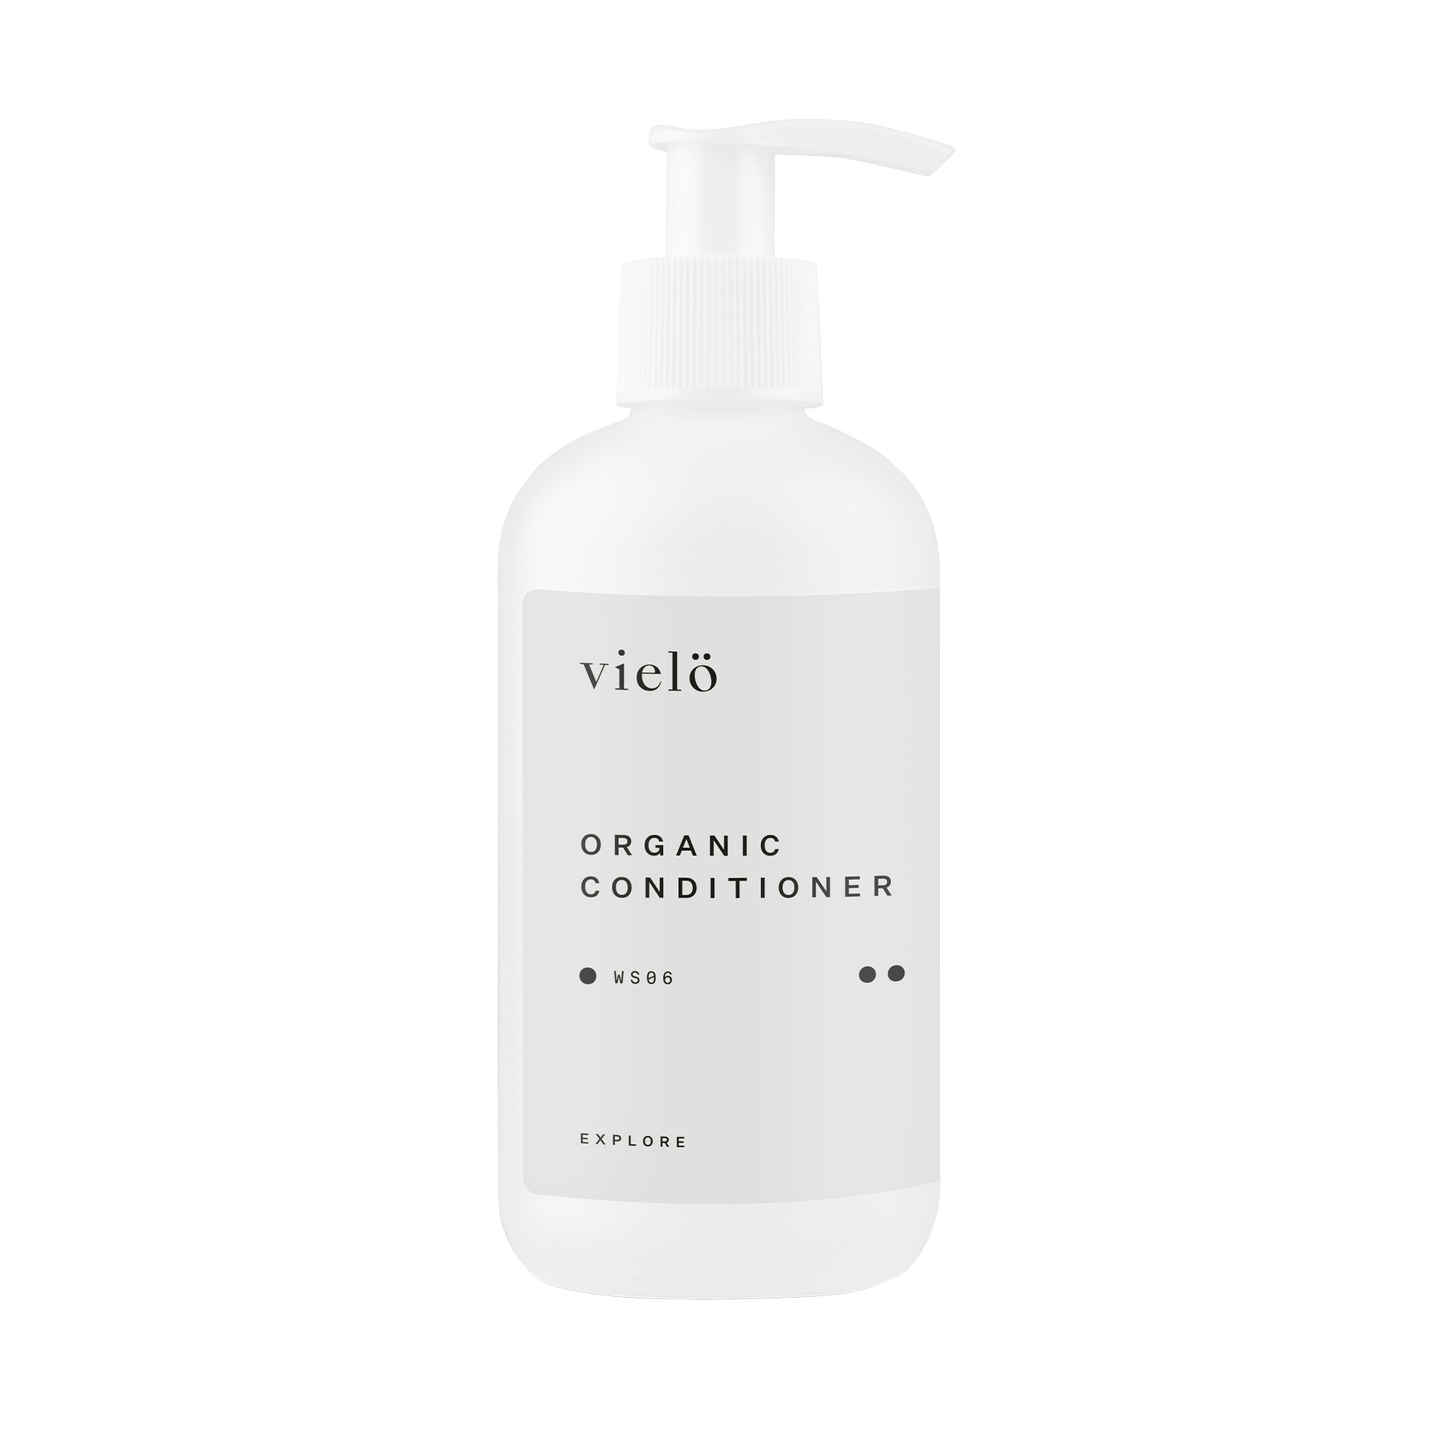 Vielo Organic Conditioner: Nourishing organic conditioner, specially designed to strengthen and moisturize damaged hair, leaving it soft and smooth. Suitable for all hair types.